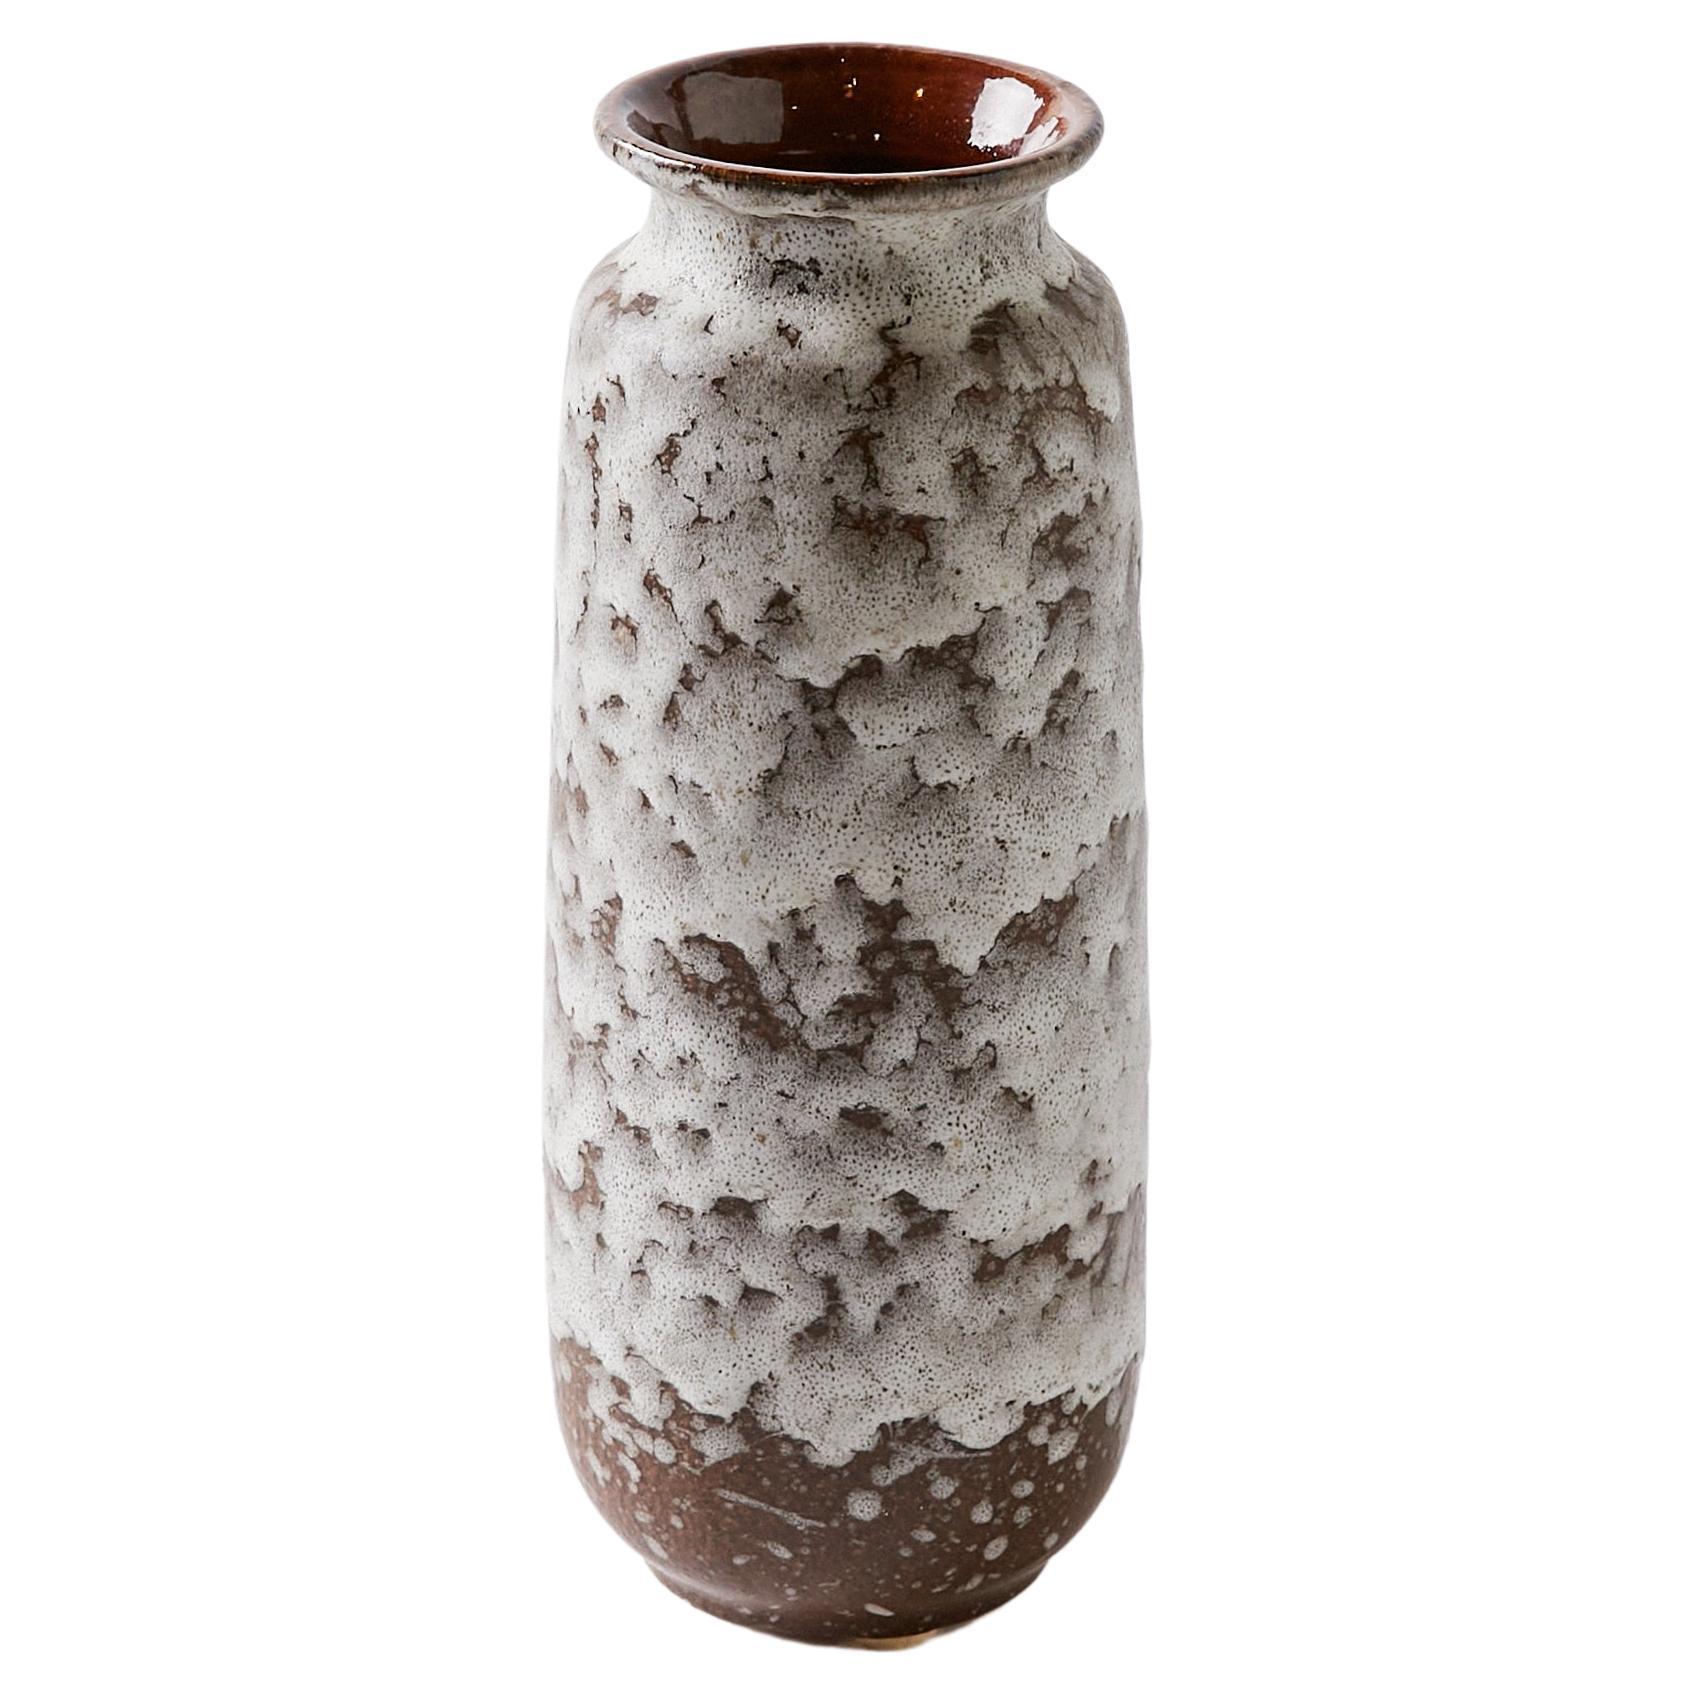 Fat Lava Vase with White Textured Finish, West Germany, 1960s